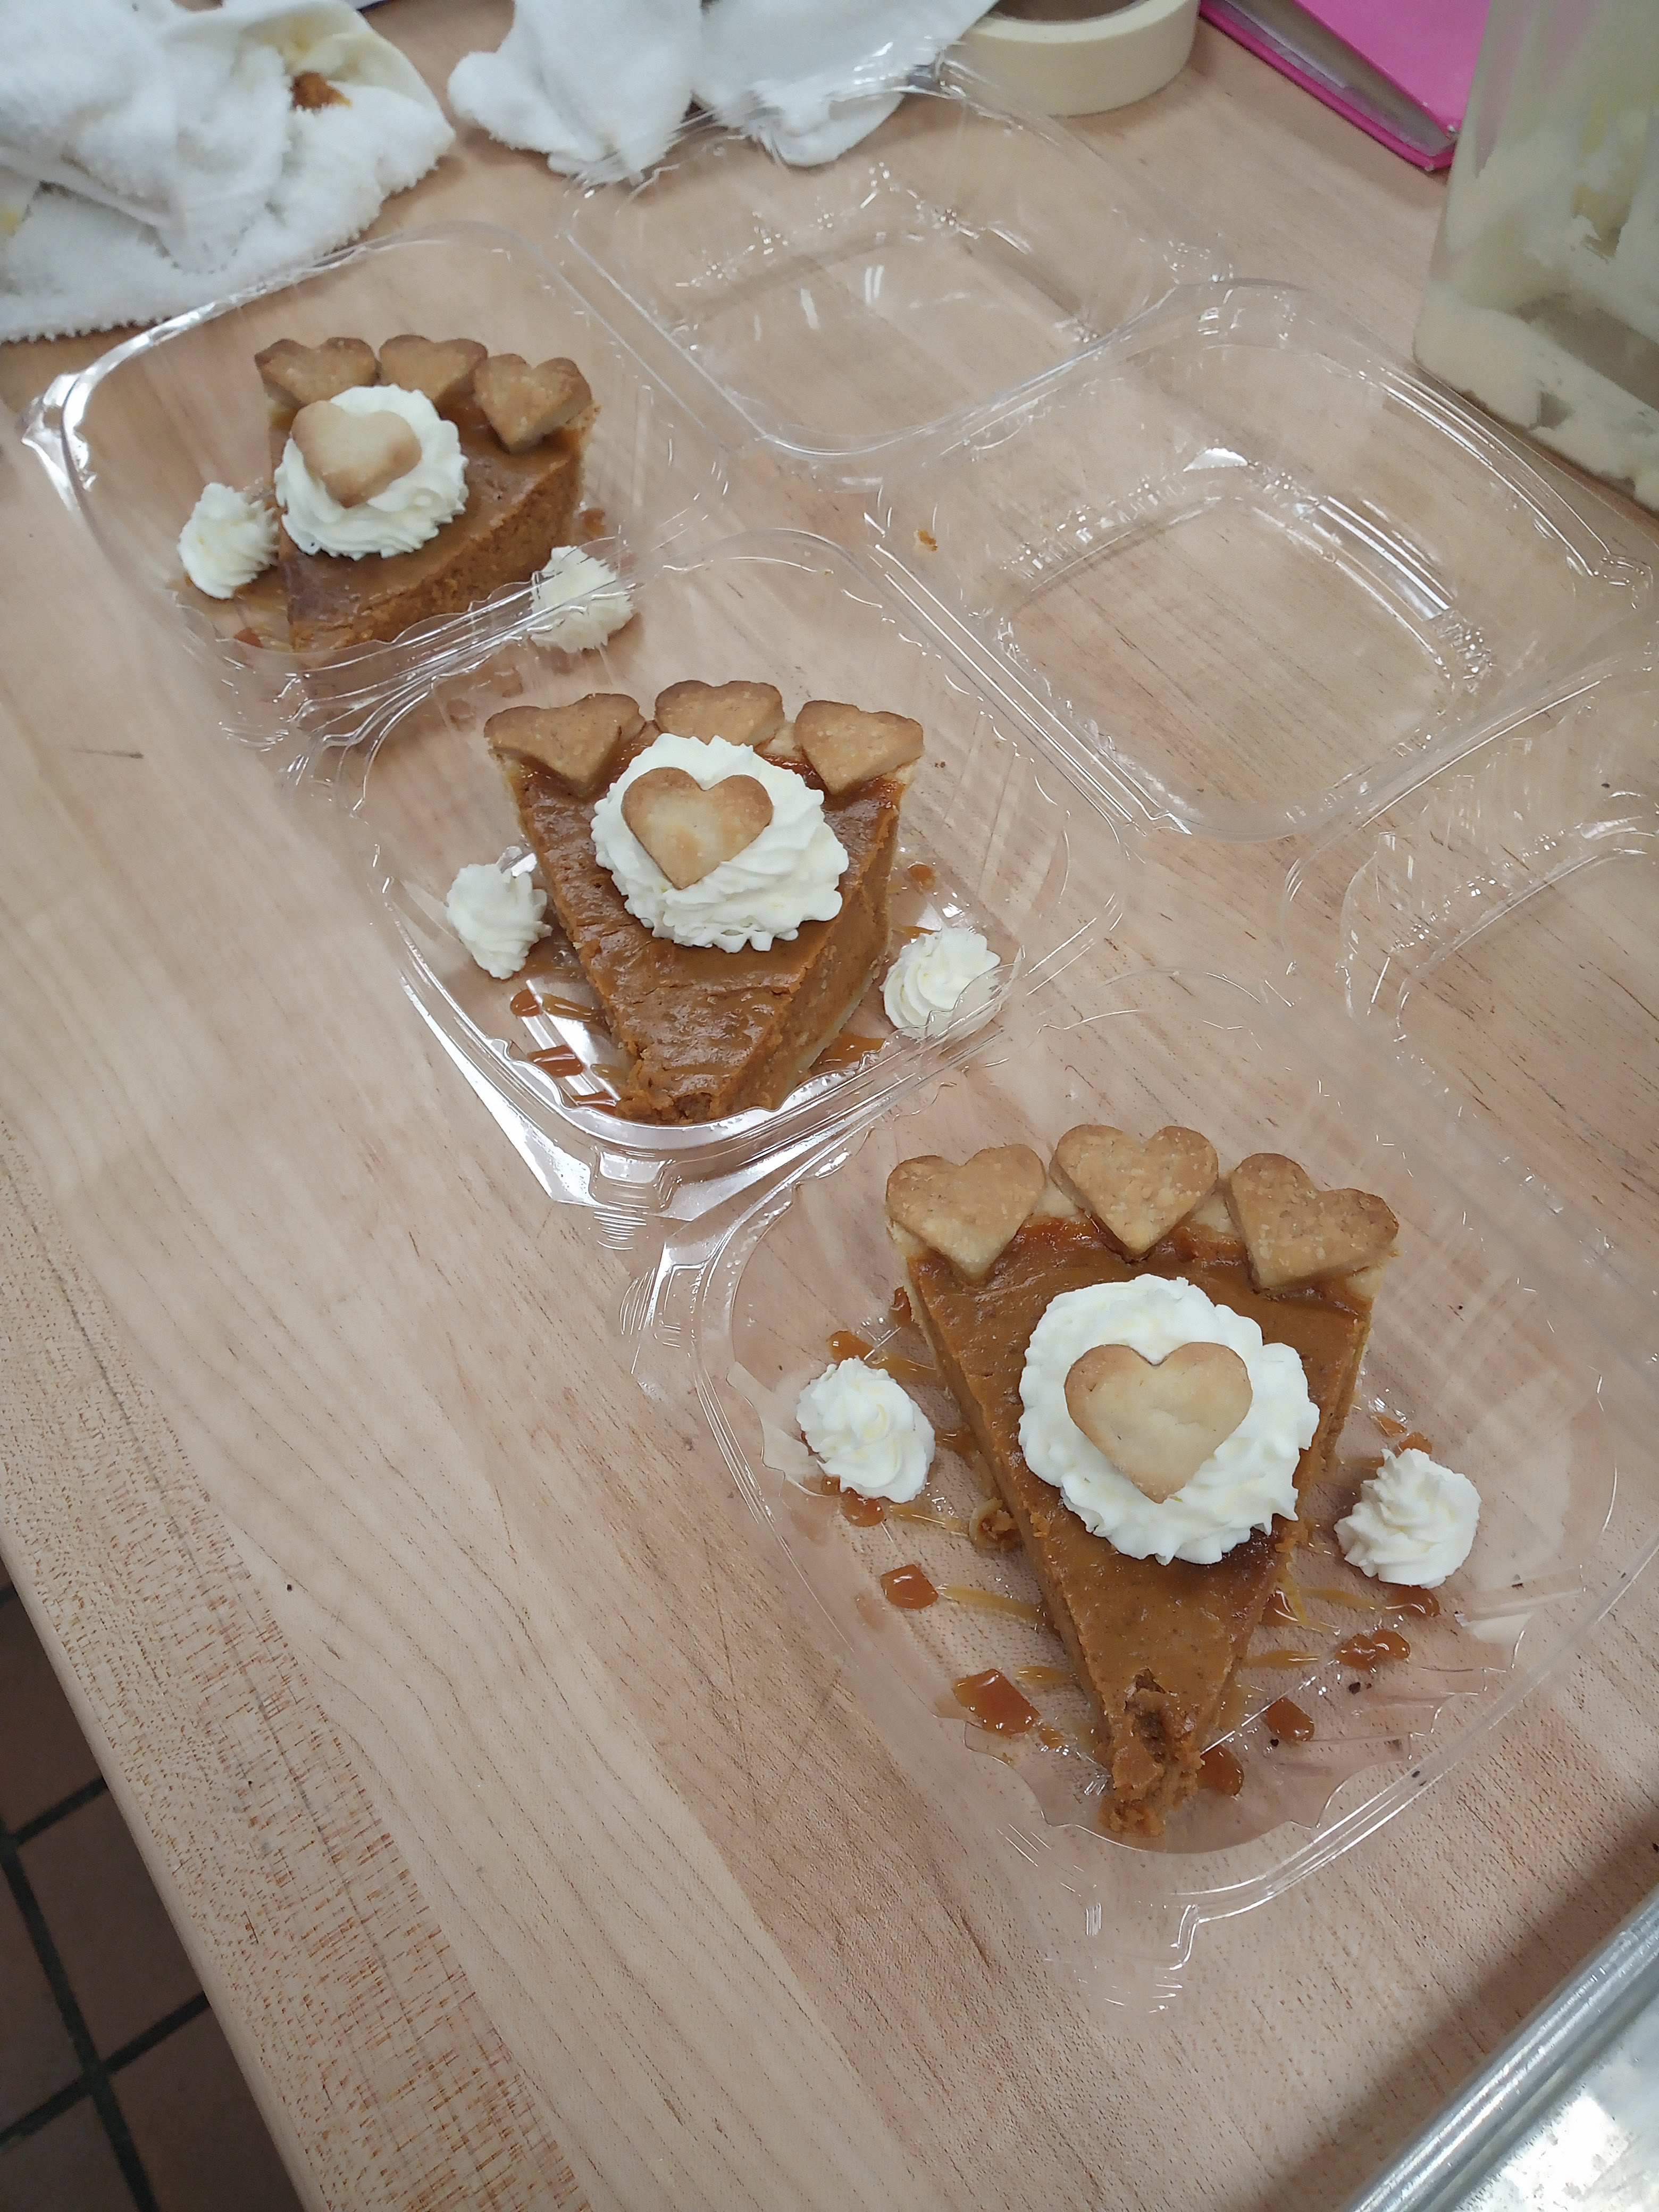 three slices of pumpkin pie with heart cutouts on the crust and on top of whipped cream garnish all in clear takeout containers